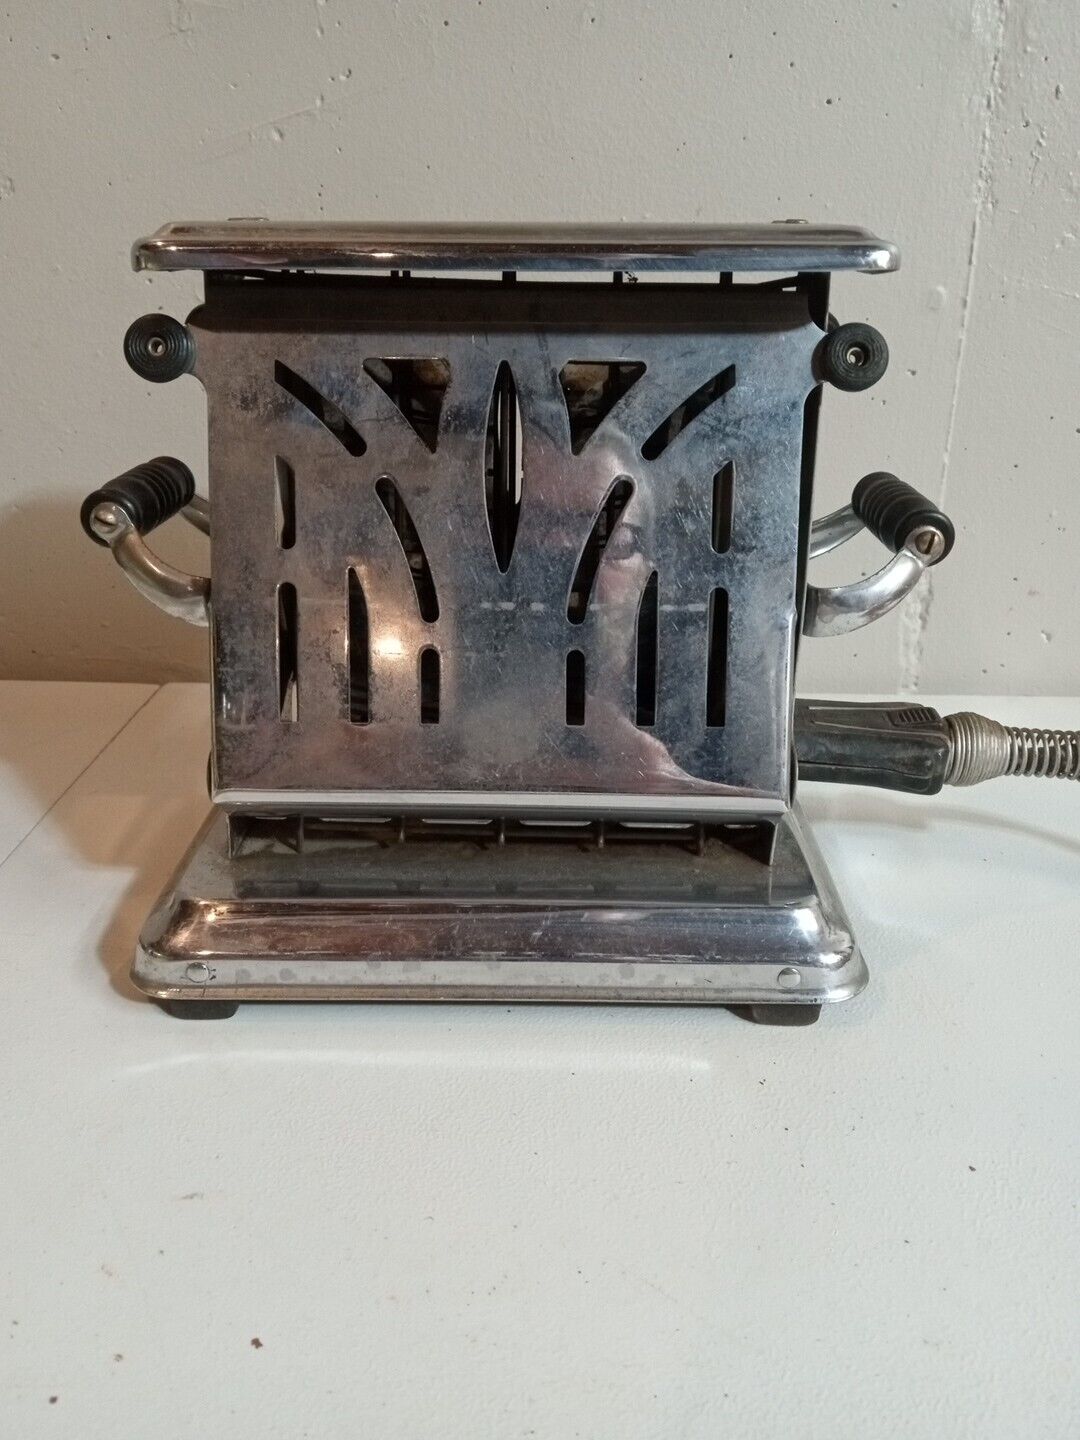 Vintage Electrahot Chrome Toaster With Original Cord,Style #48 Works